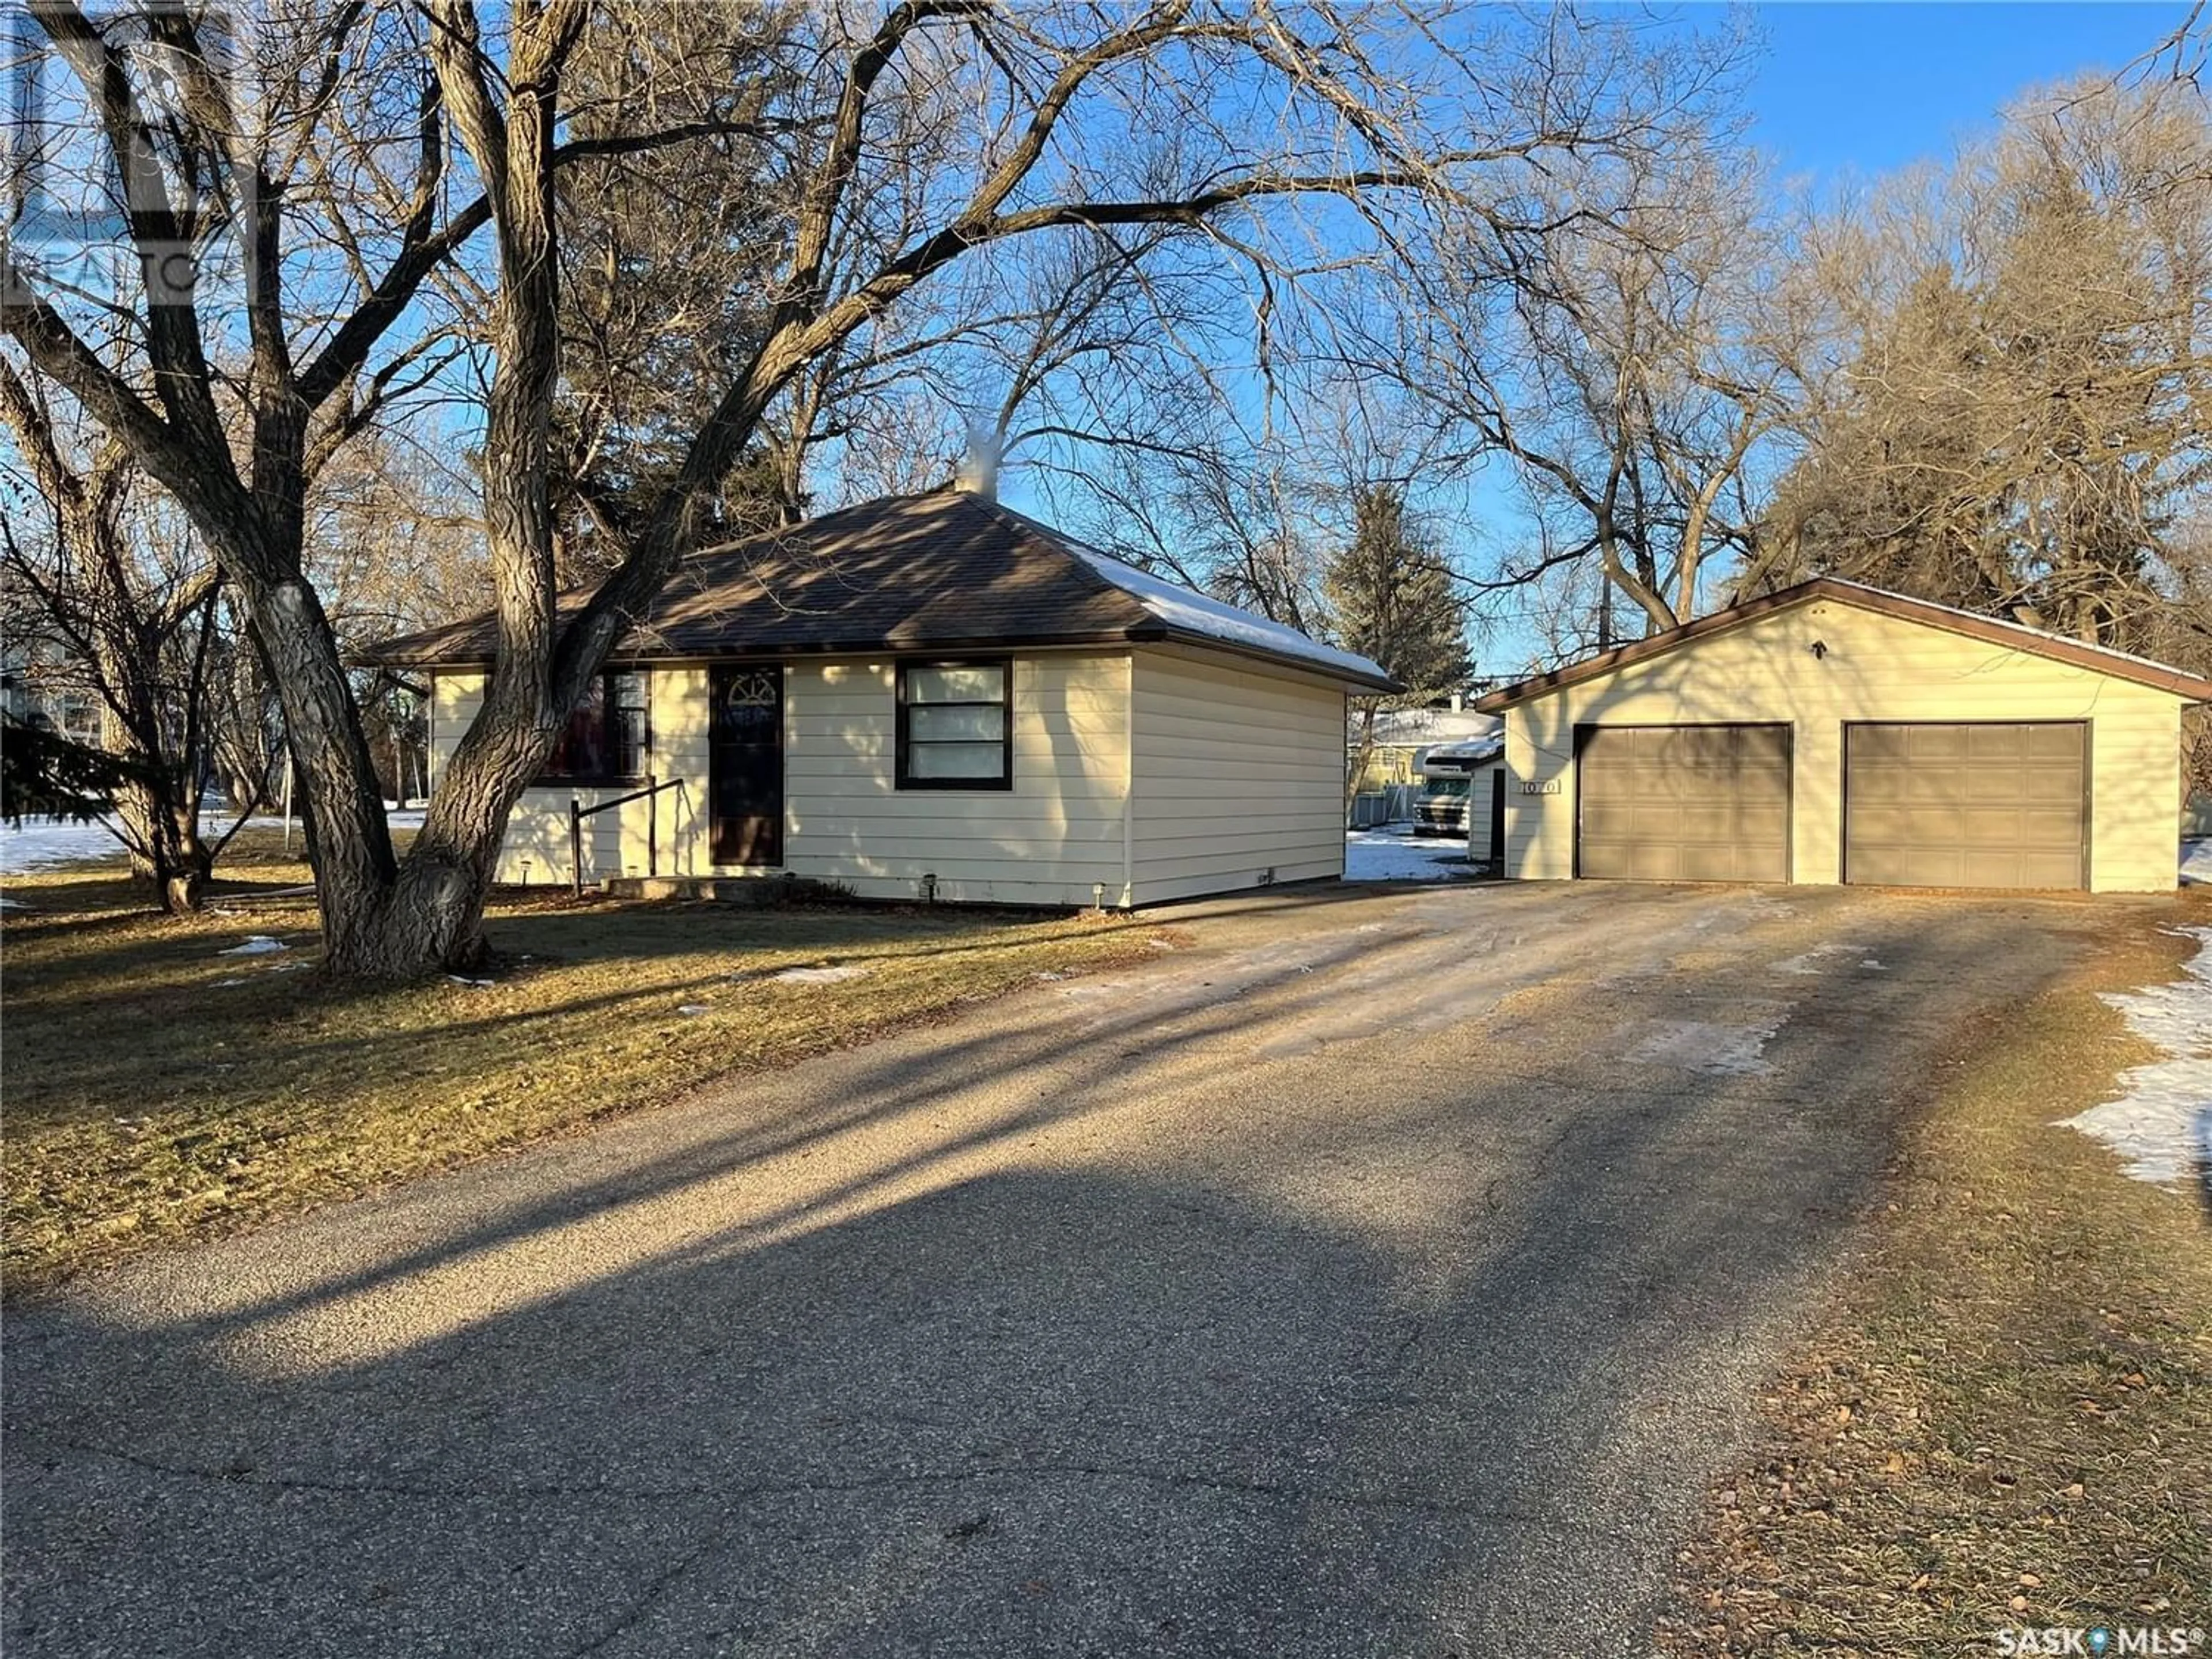 Home with unknown exterior material for 1020 Moose STREET, Moosomin Saskatchewan S0G3N0